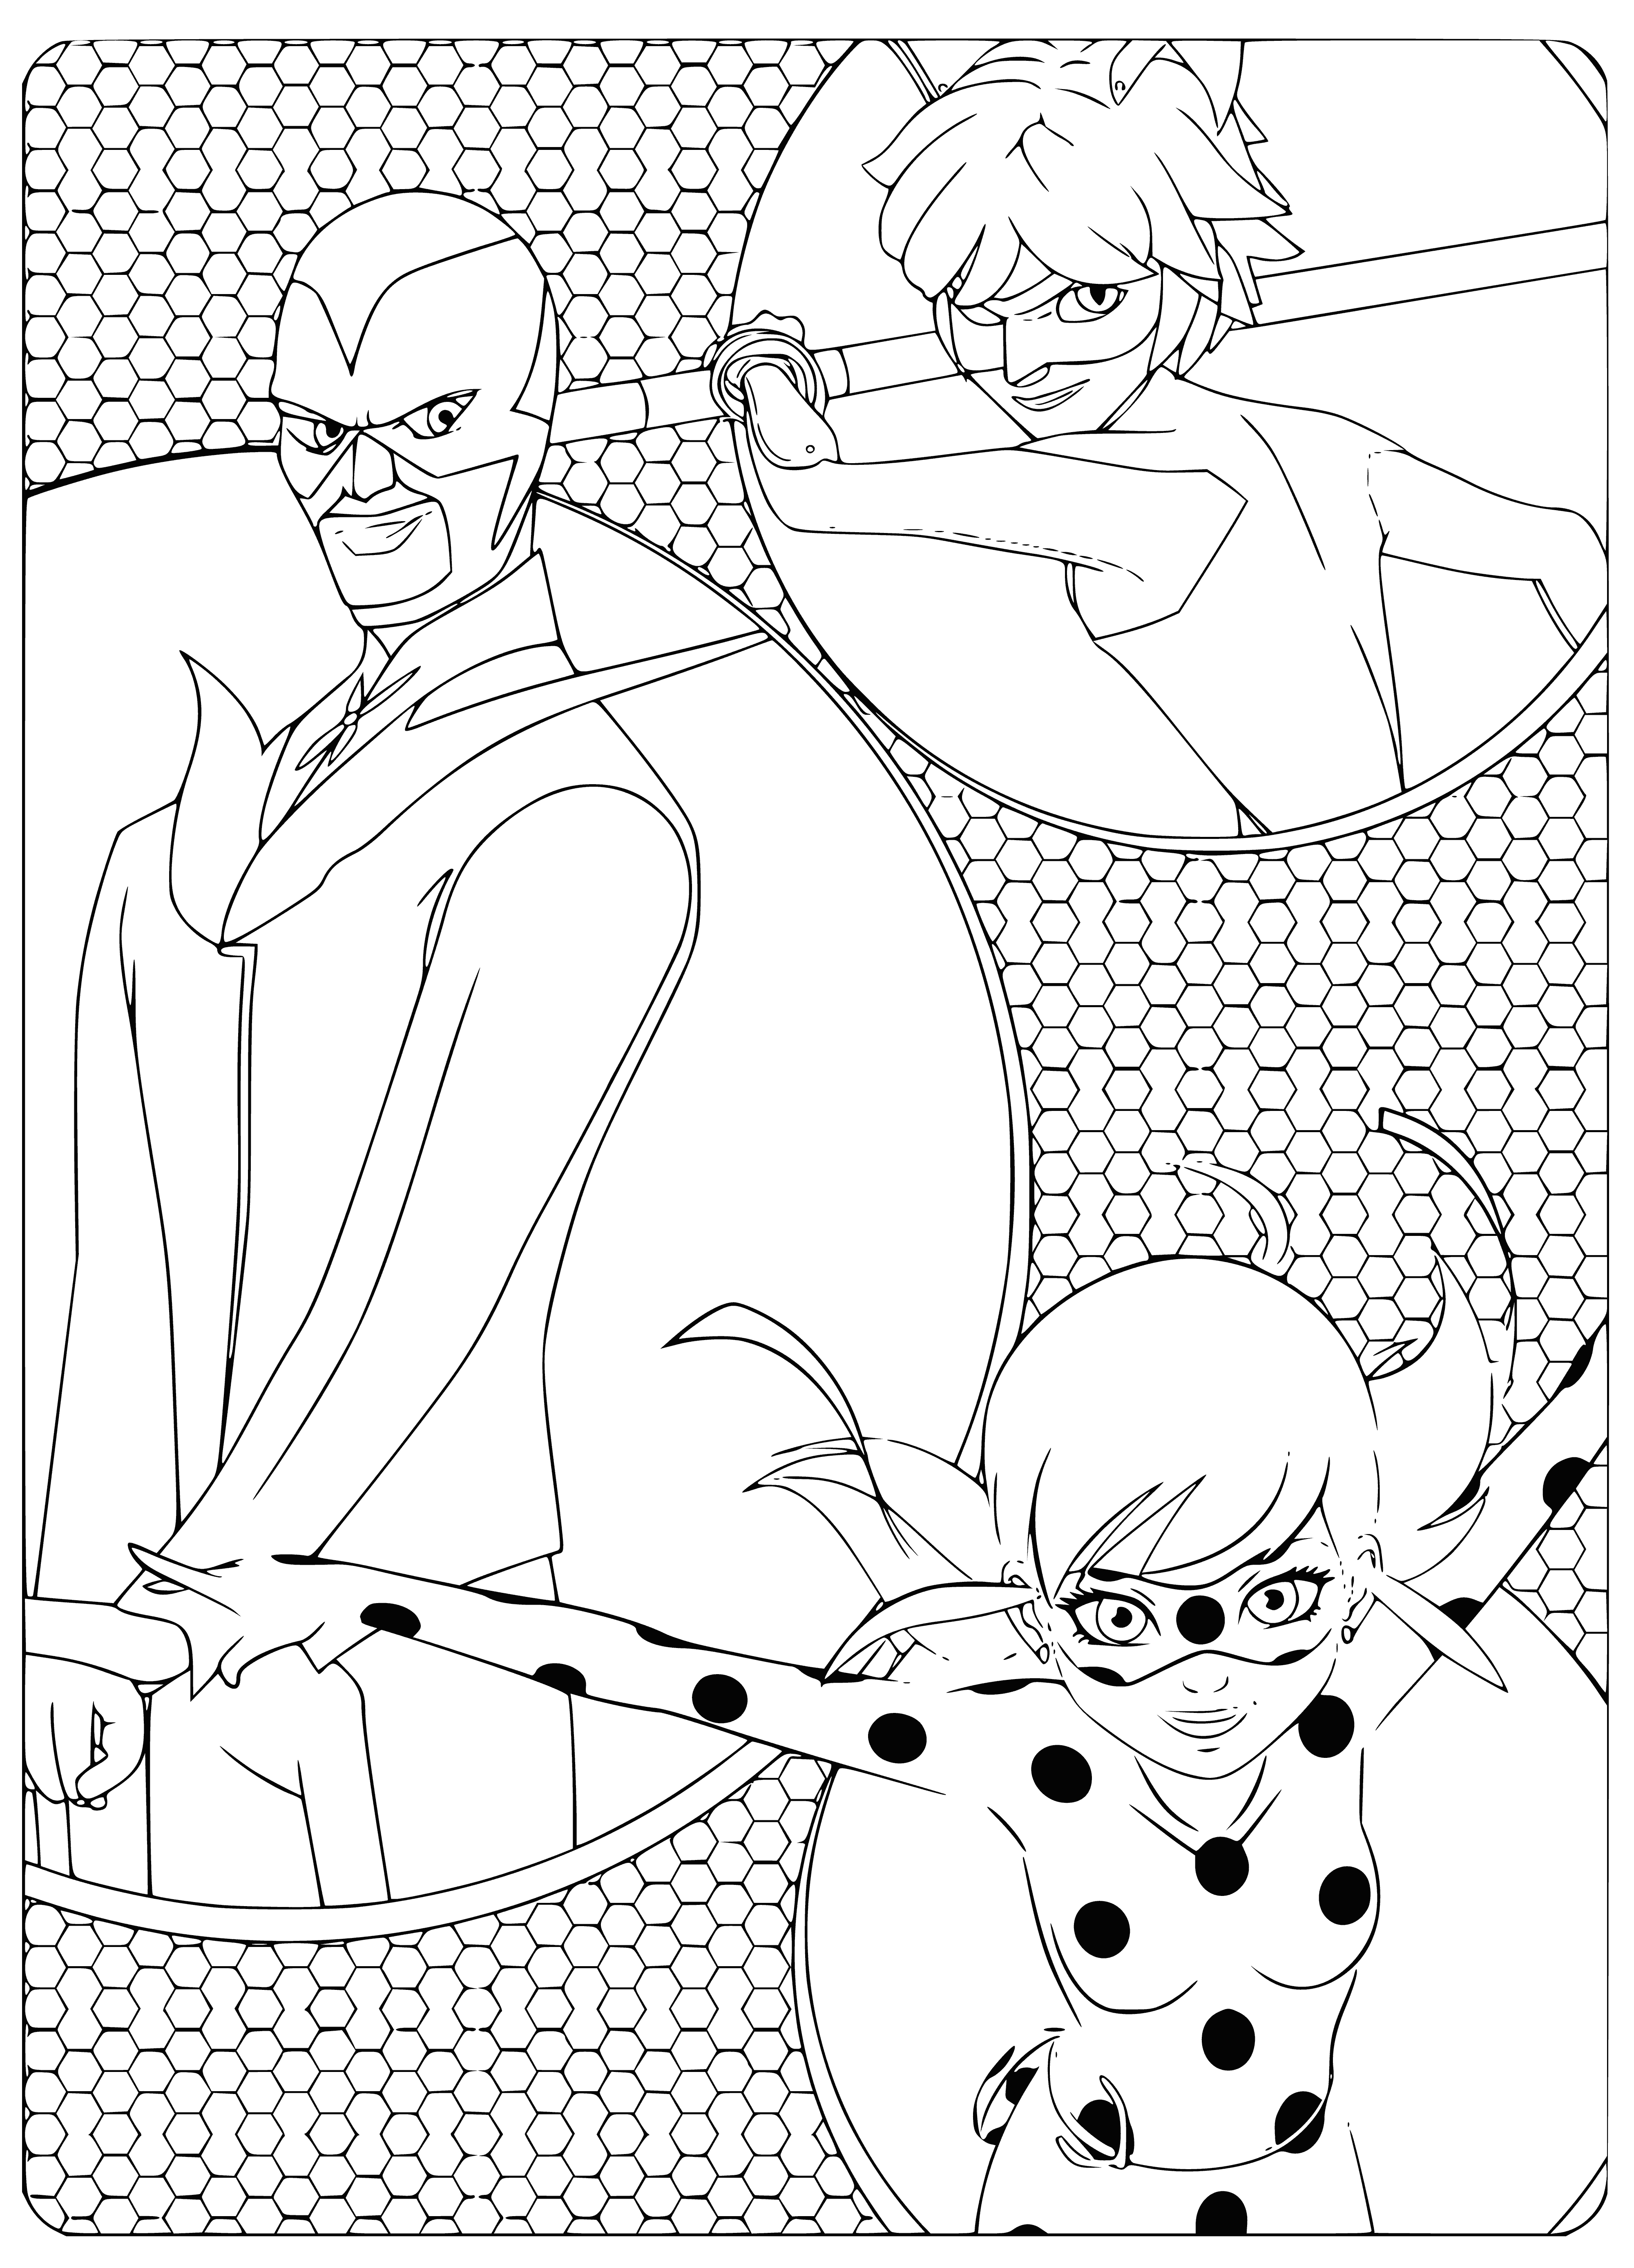 coloring page: Hawk Moth is a villain with lepidoptera-themed powers. Ladybug & Supercat battle him, with Ladybug having luck manipulation and Supercat possessing cat-like abilities.